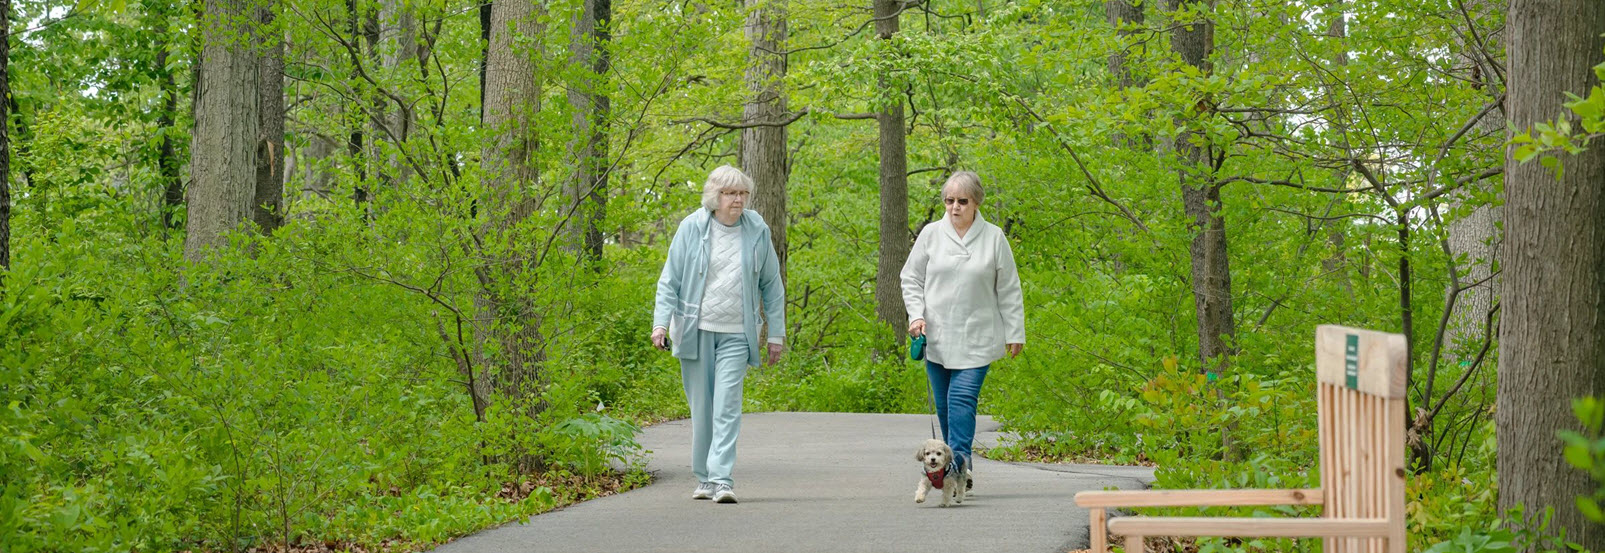 two senior ladies walk on a paved path in the woods with a dog